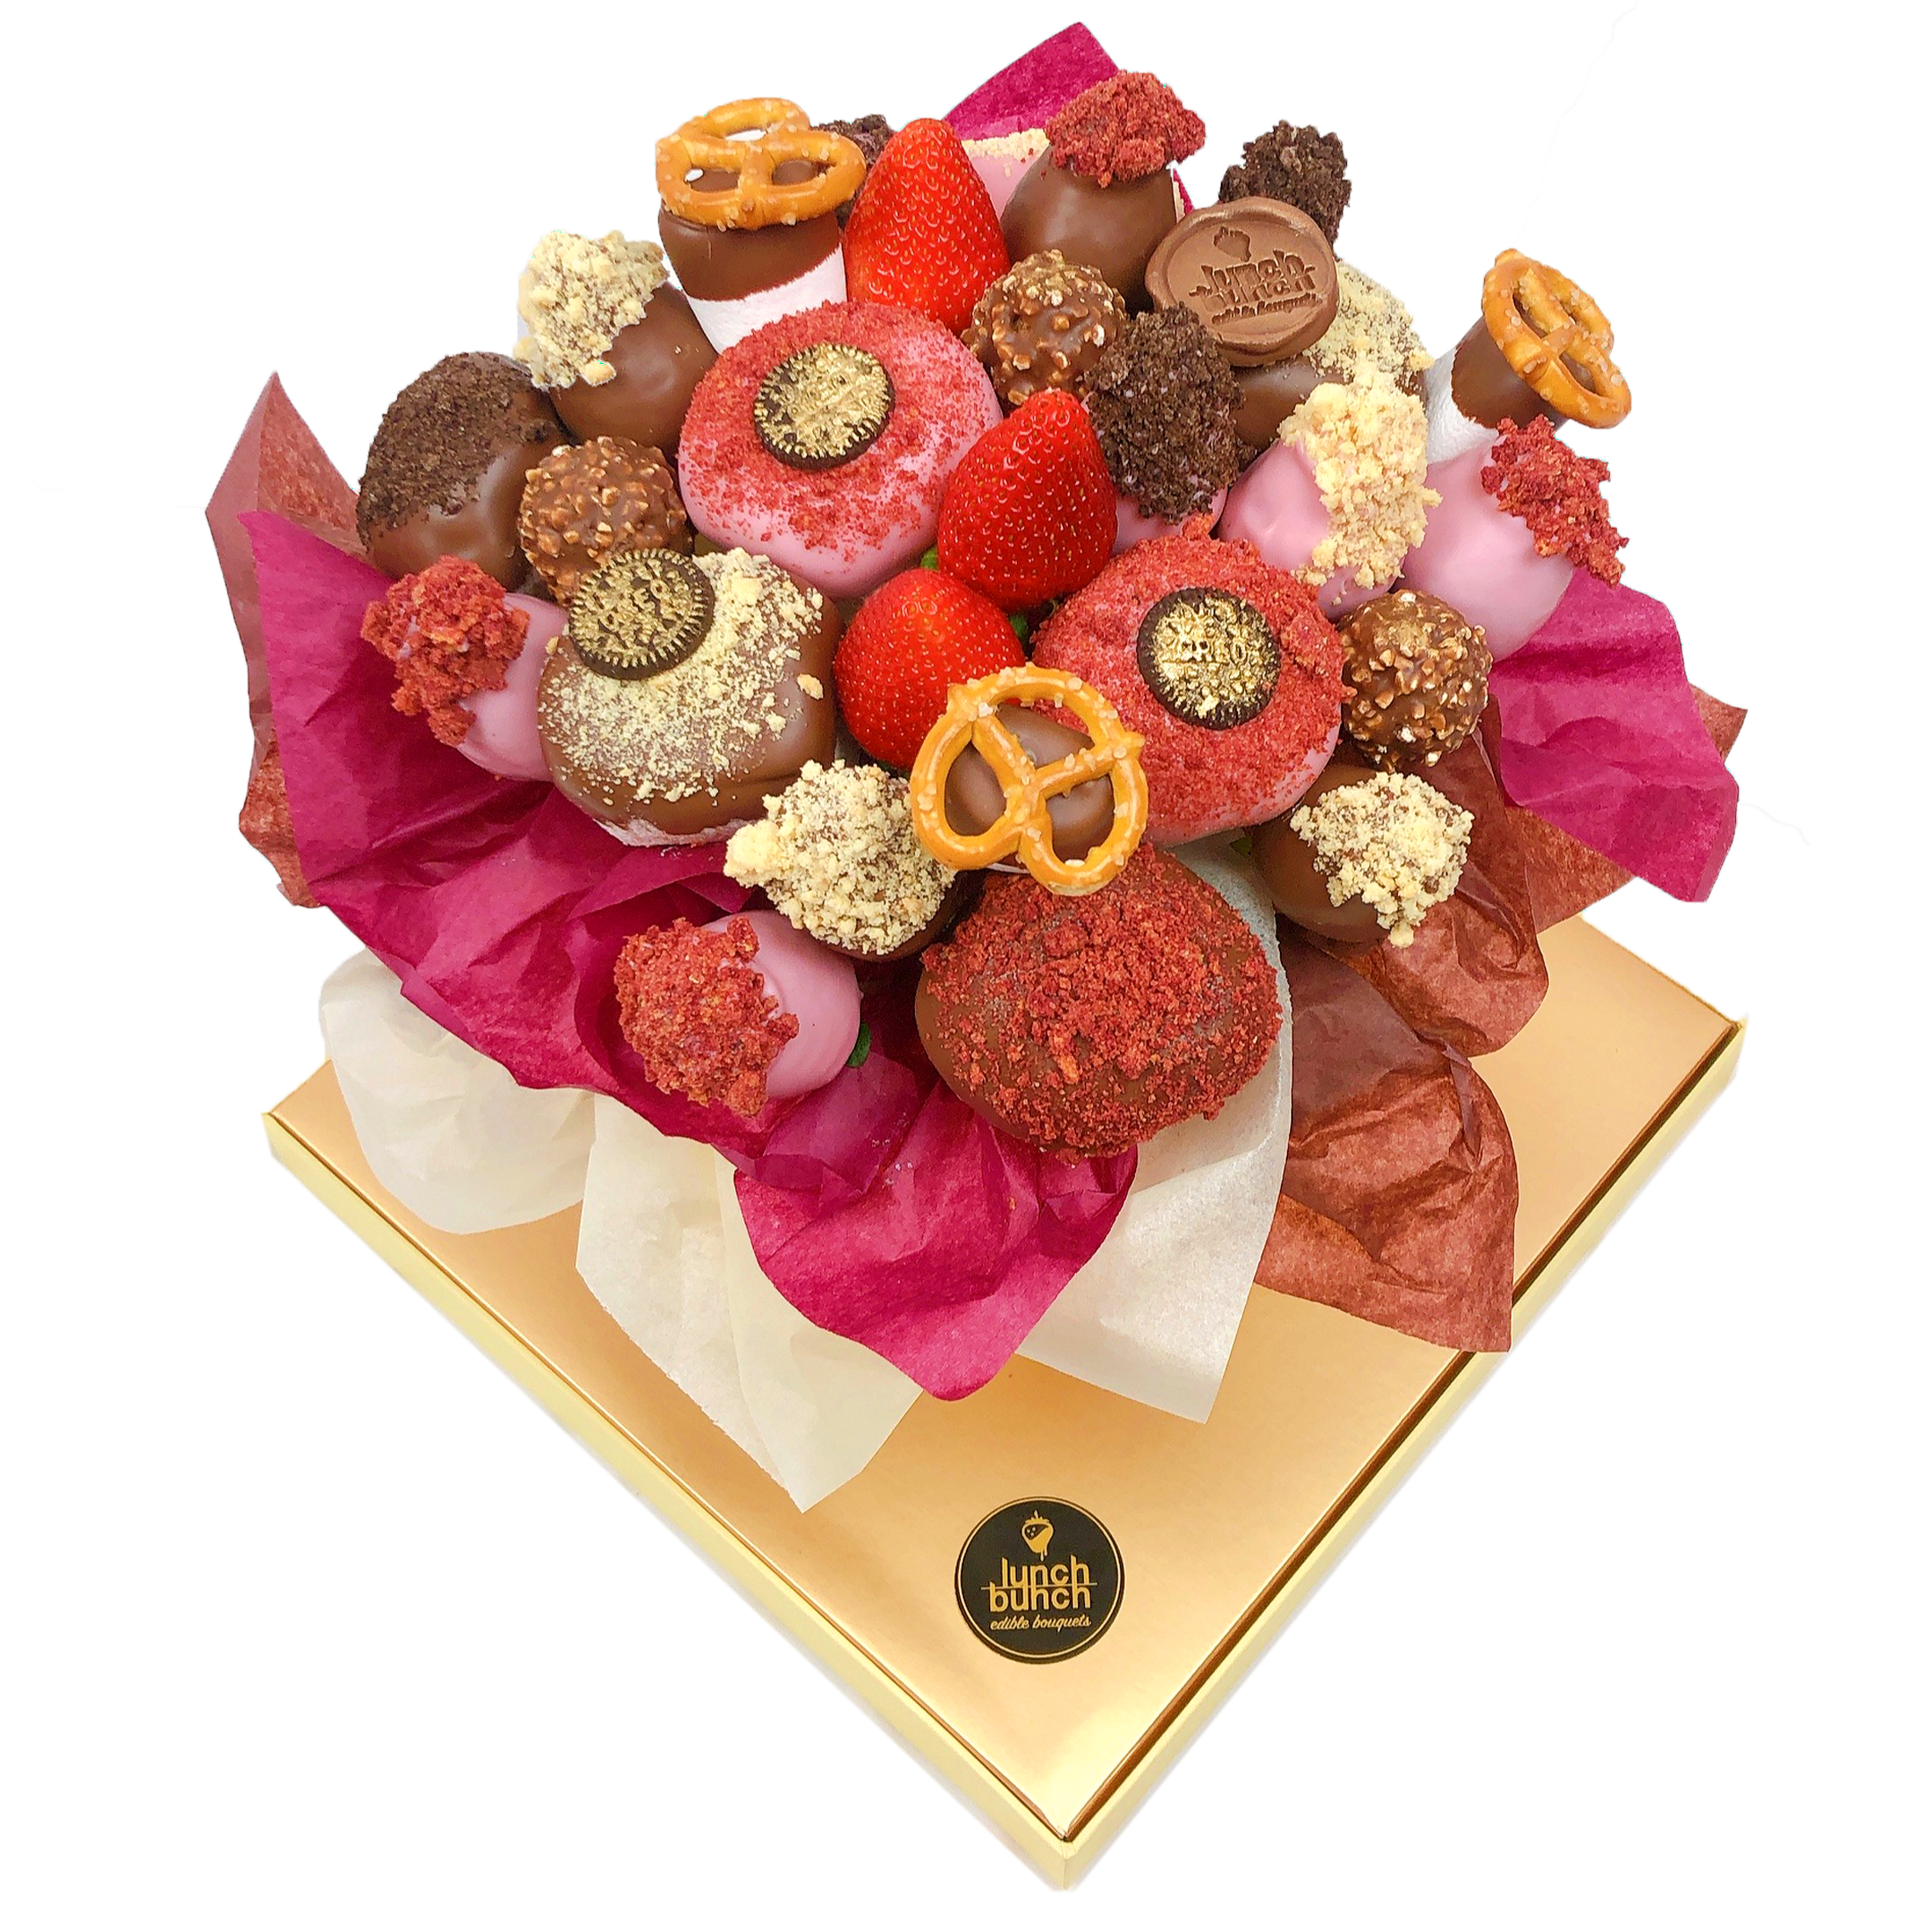 Oreo Cookies Trio Donut Bouquet chocolate delivery Adelaide order online birthday chocolate gift